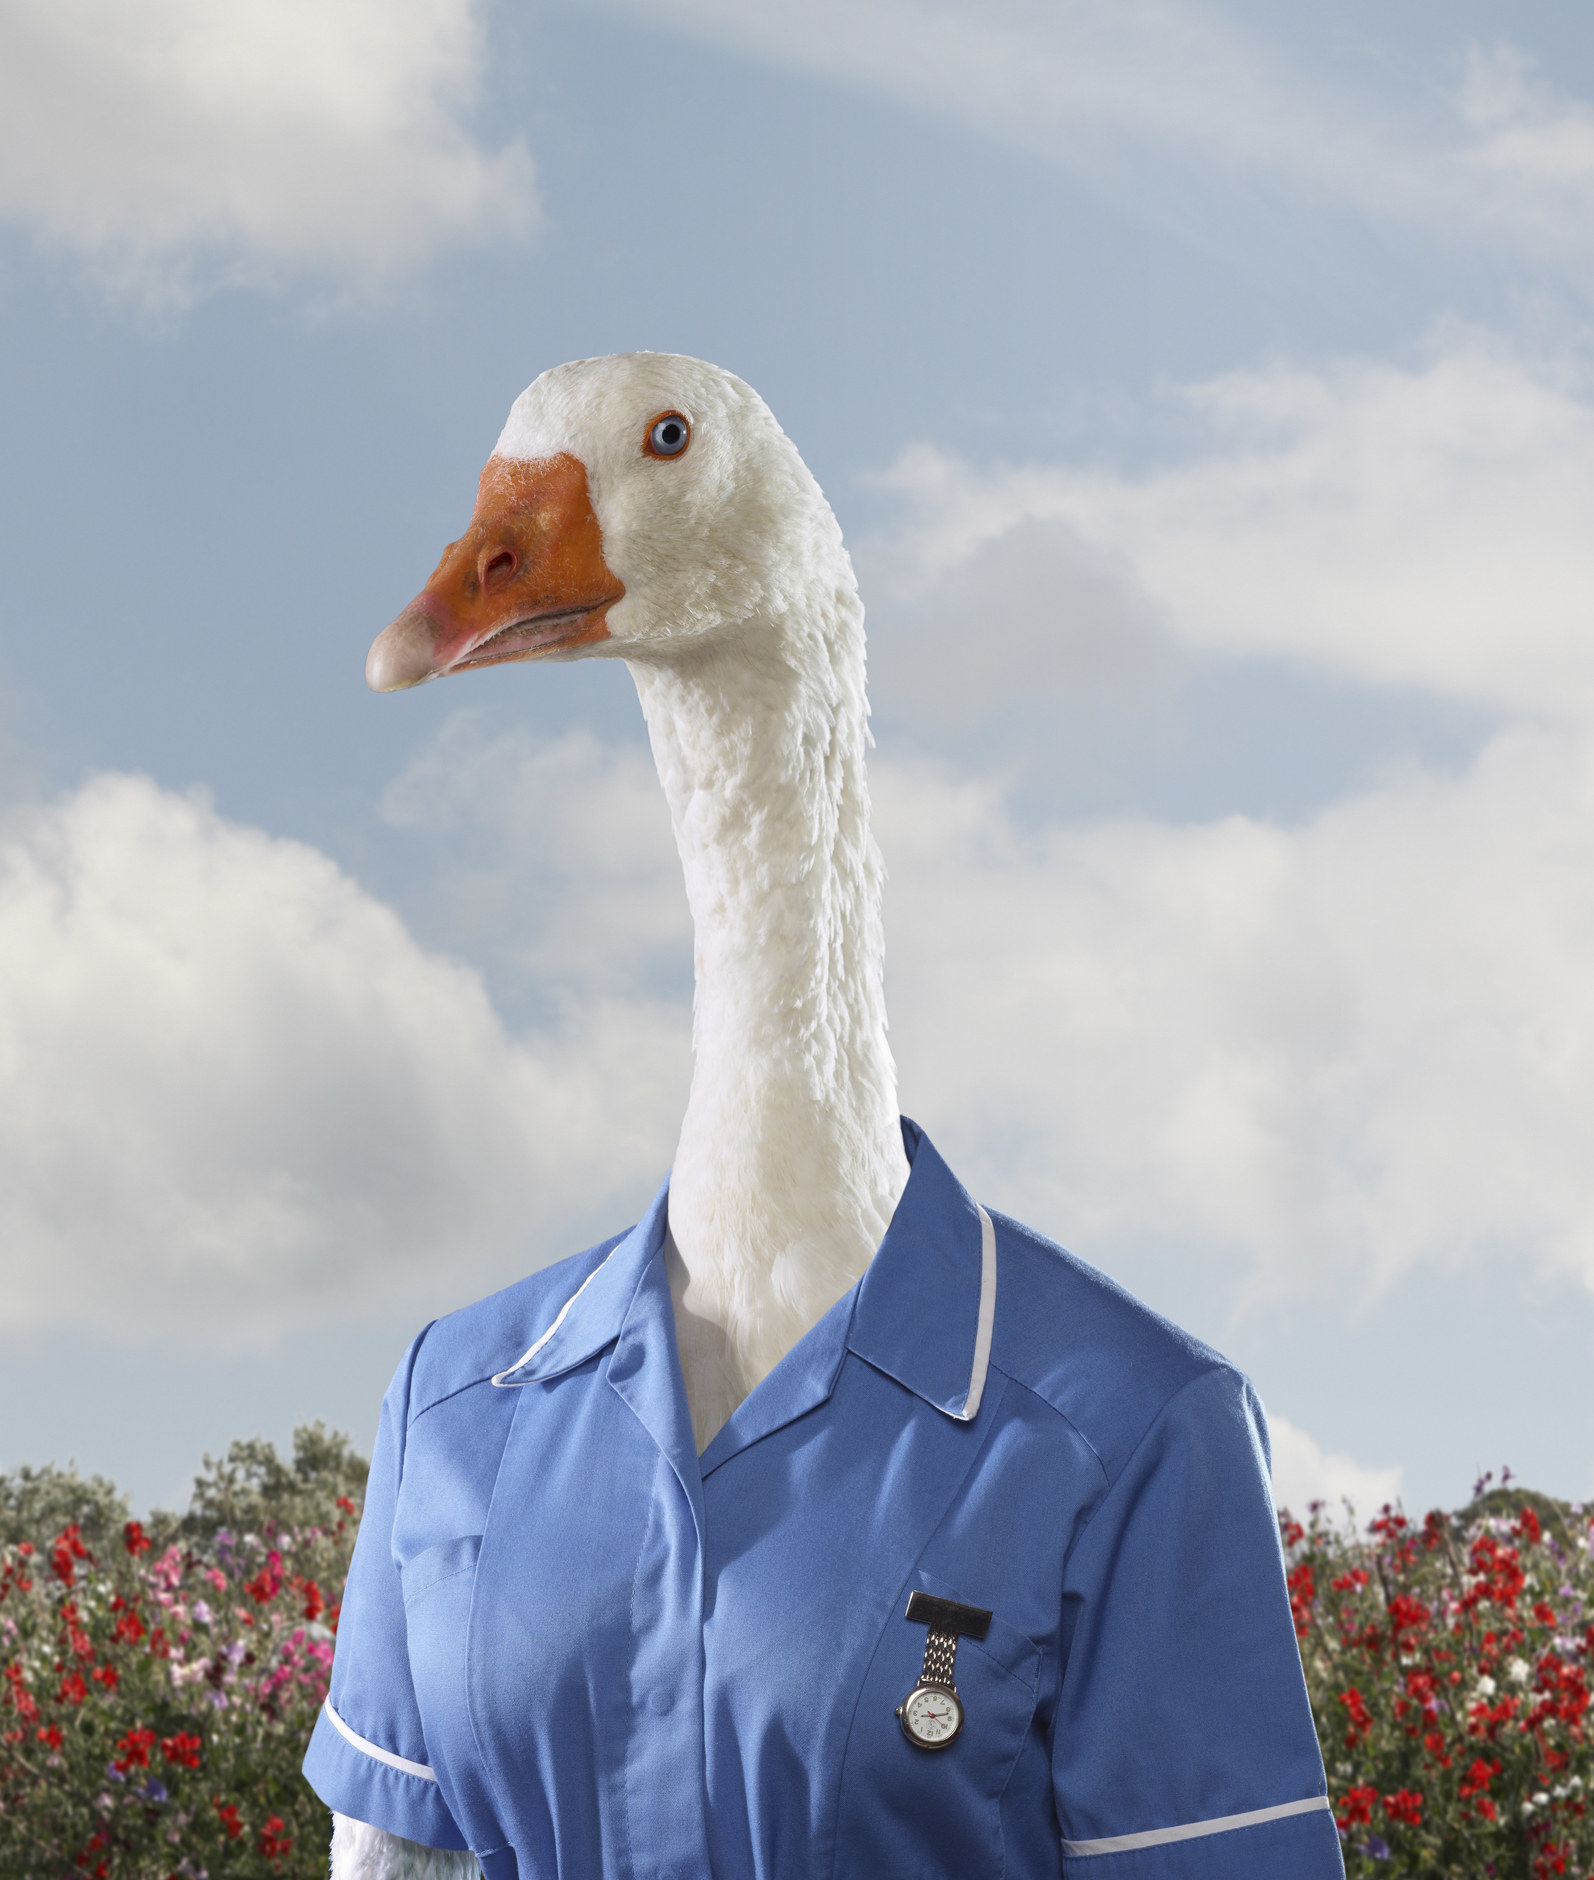 goose wearing a nurse outfit